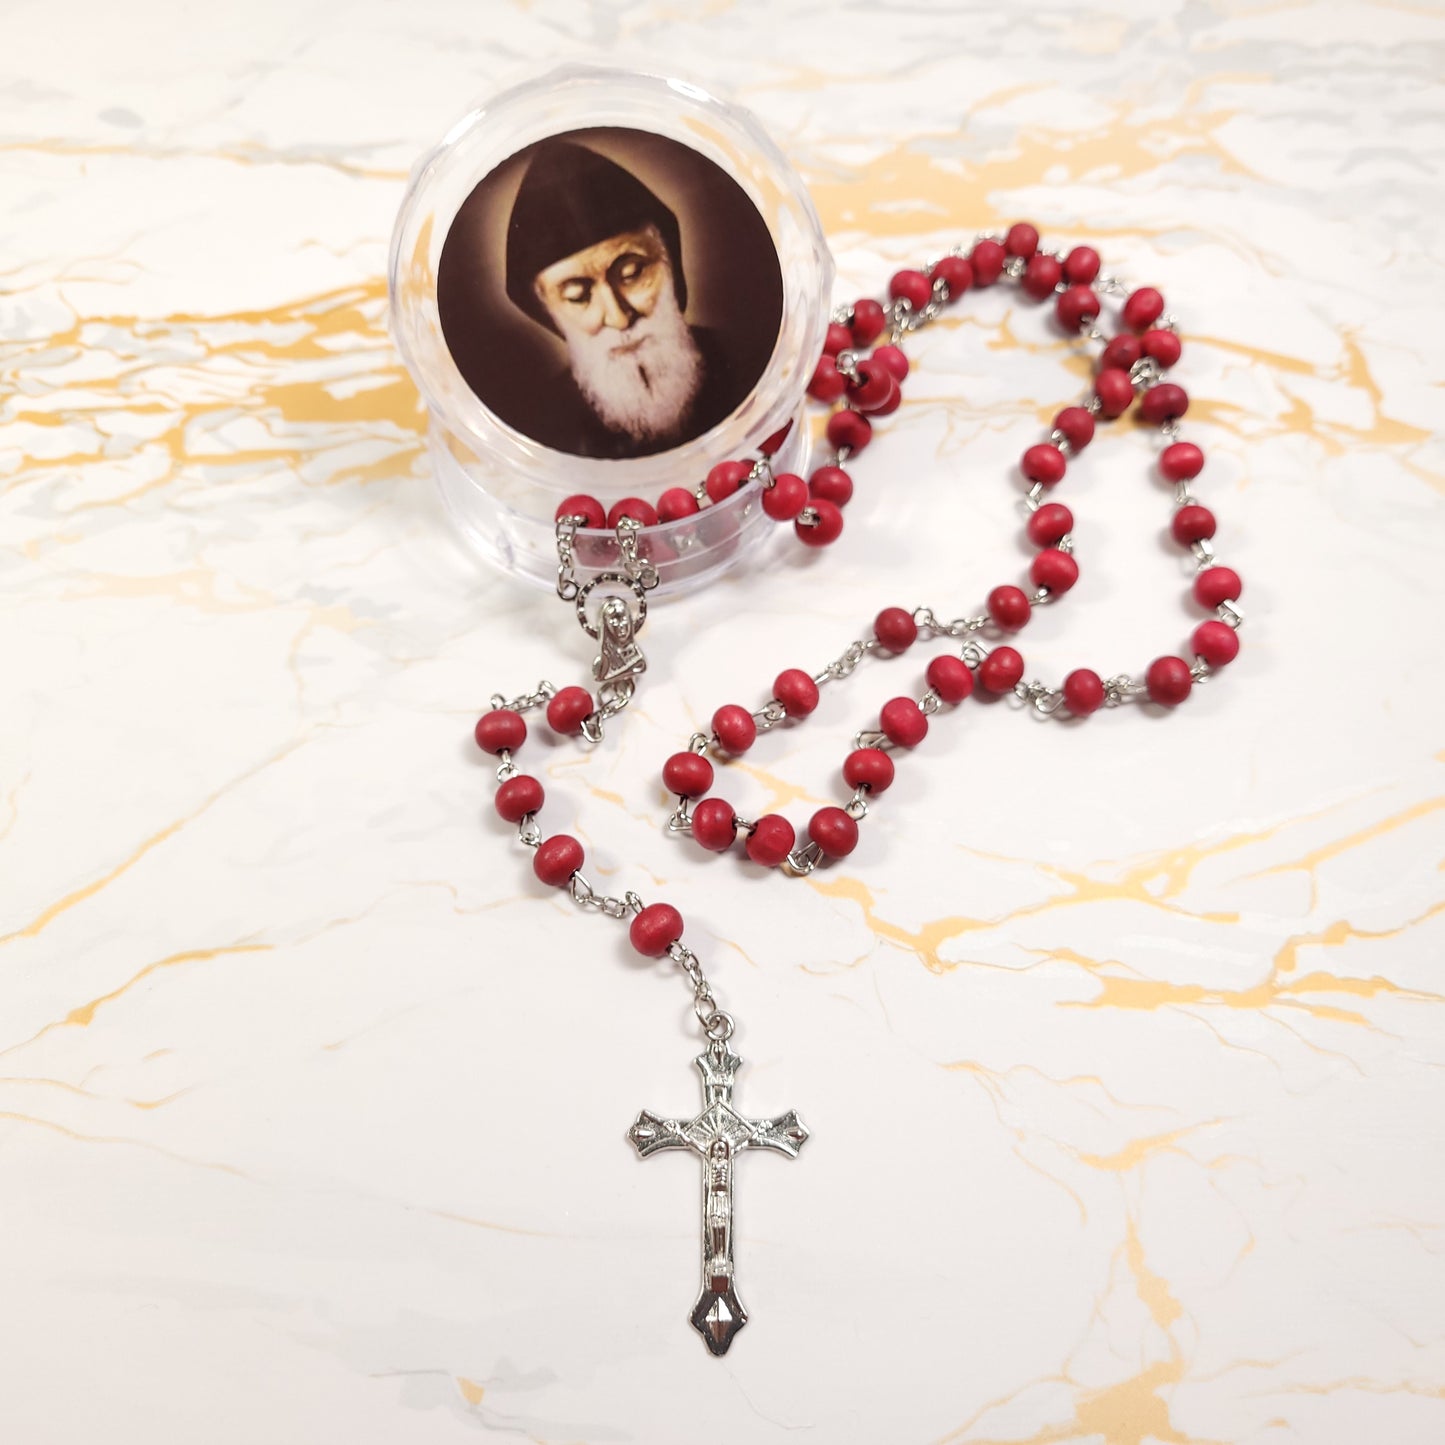 Saint Charbel Rose wood rosary - Our Lady of Gifts